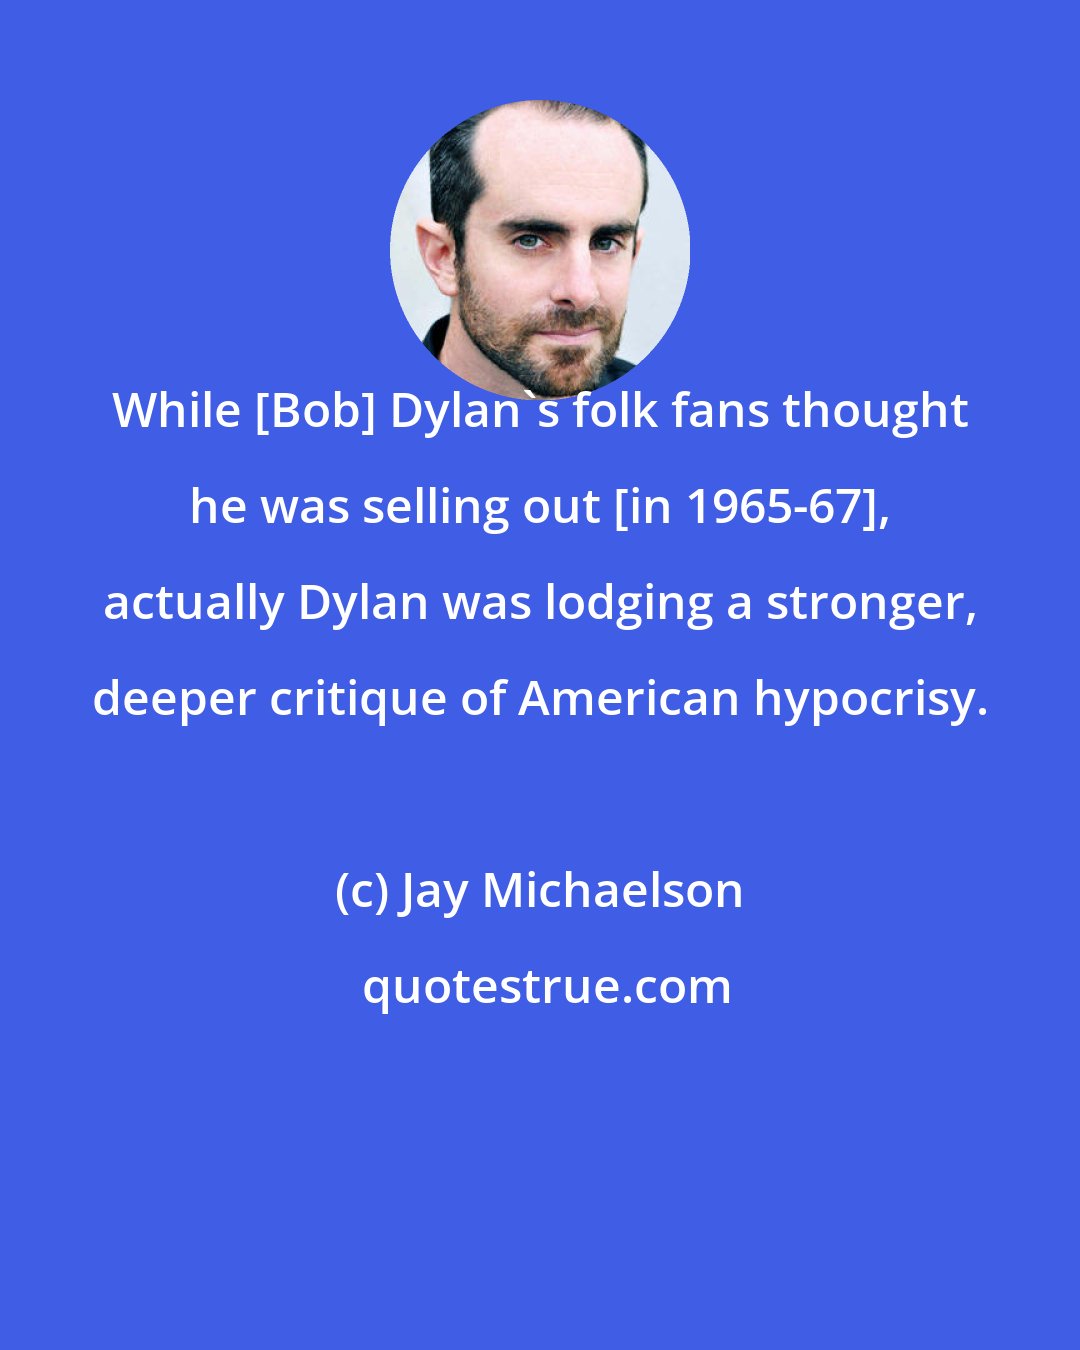 Jay Michaelson: While [Bob] Dylan's folk fans thought he was selling out [in 1965-67], actually Dylan was lodging a stronger, deeper critique of American hypocrisy.